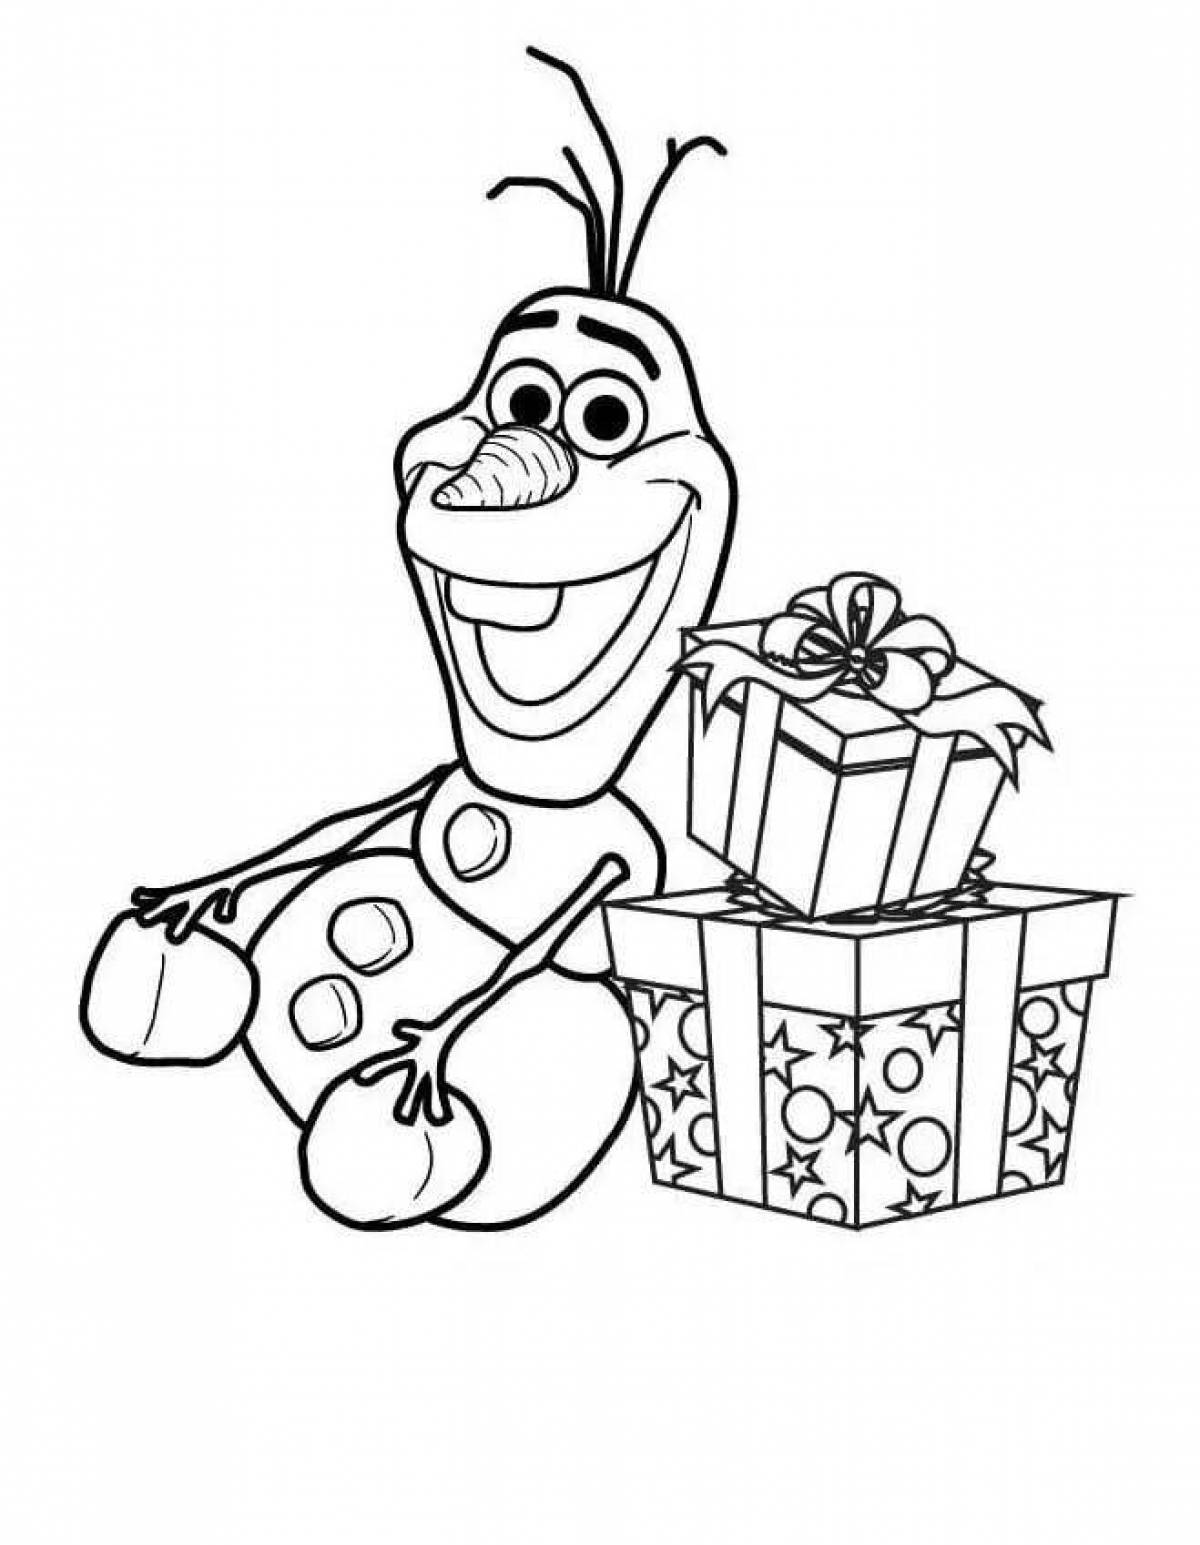 Coloring page adorable birthday snowman